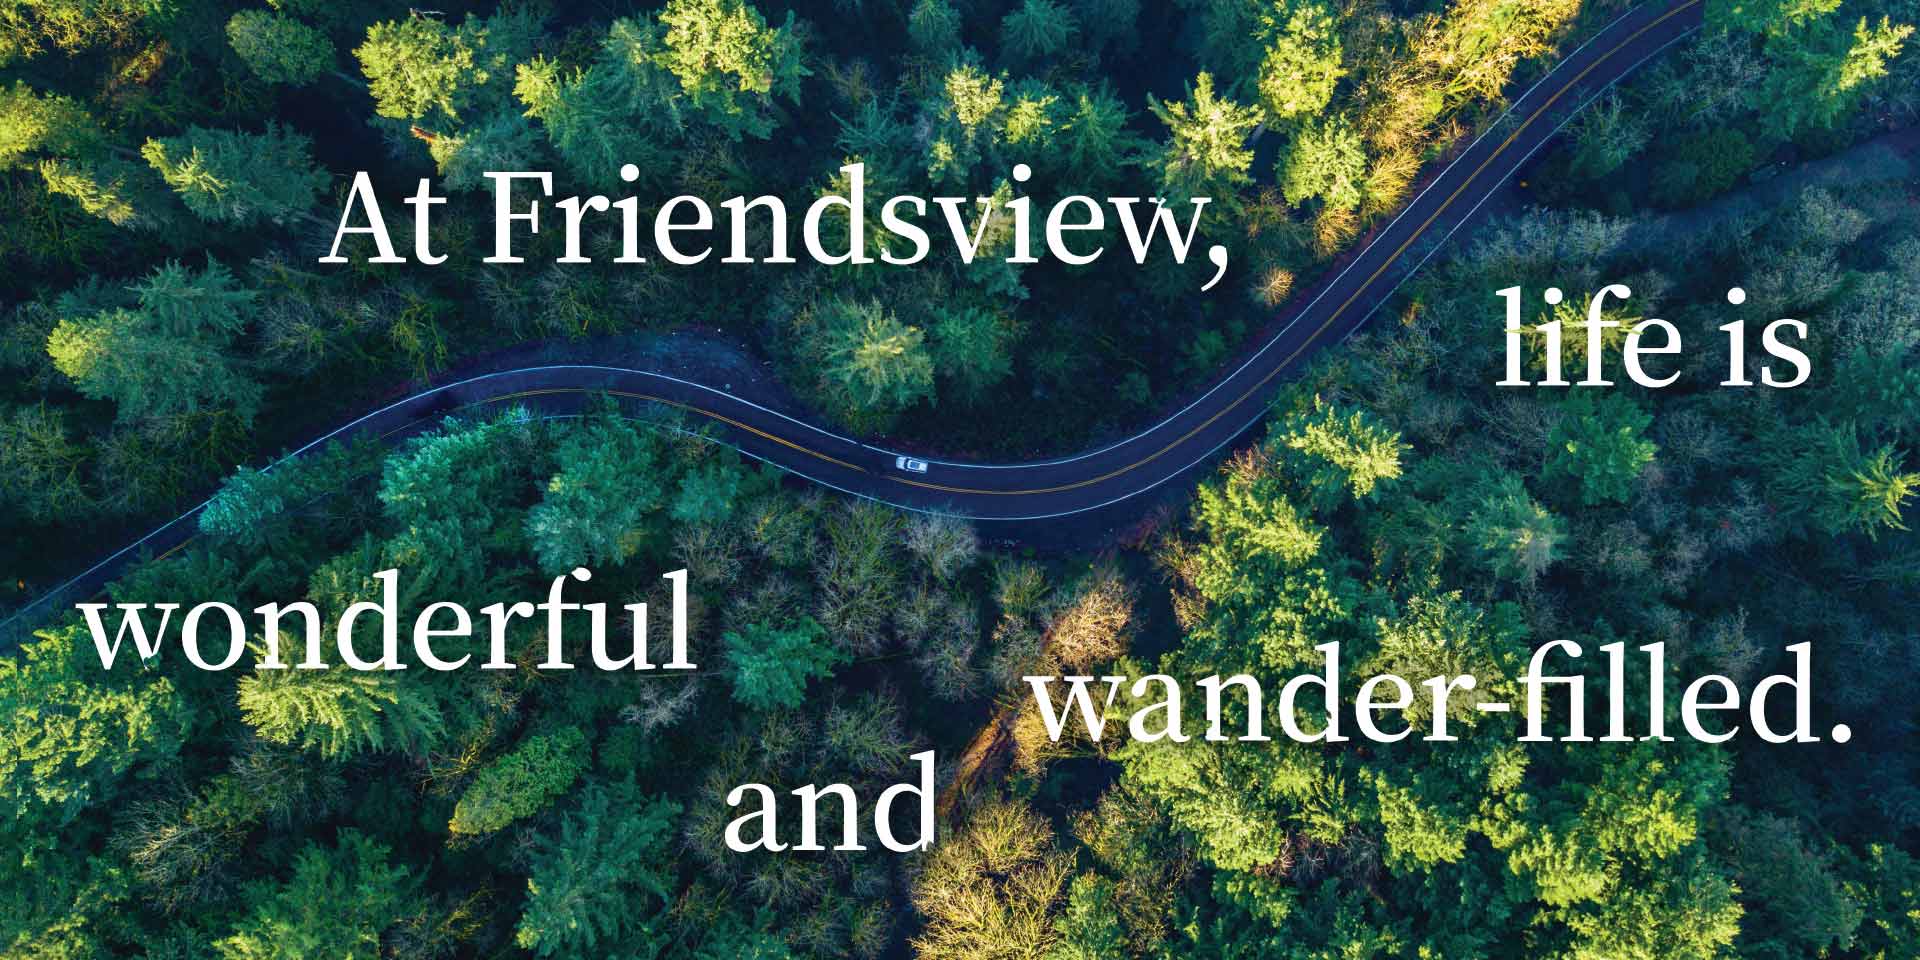 At Friendsview, life is wonderful and wander-filler.